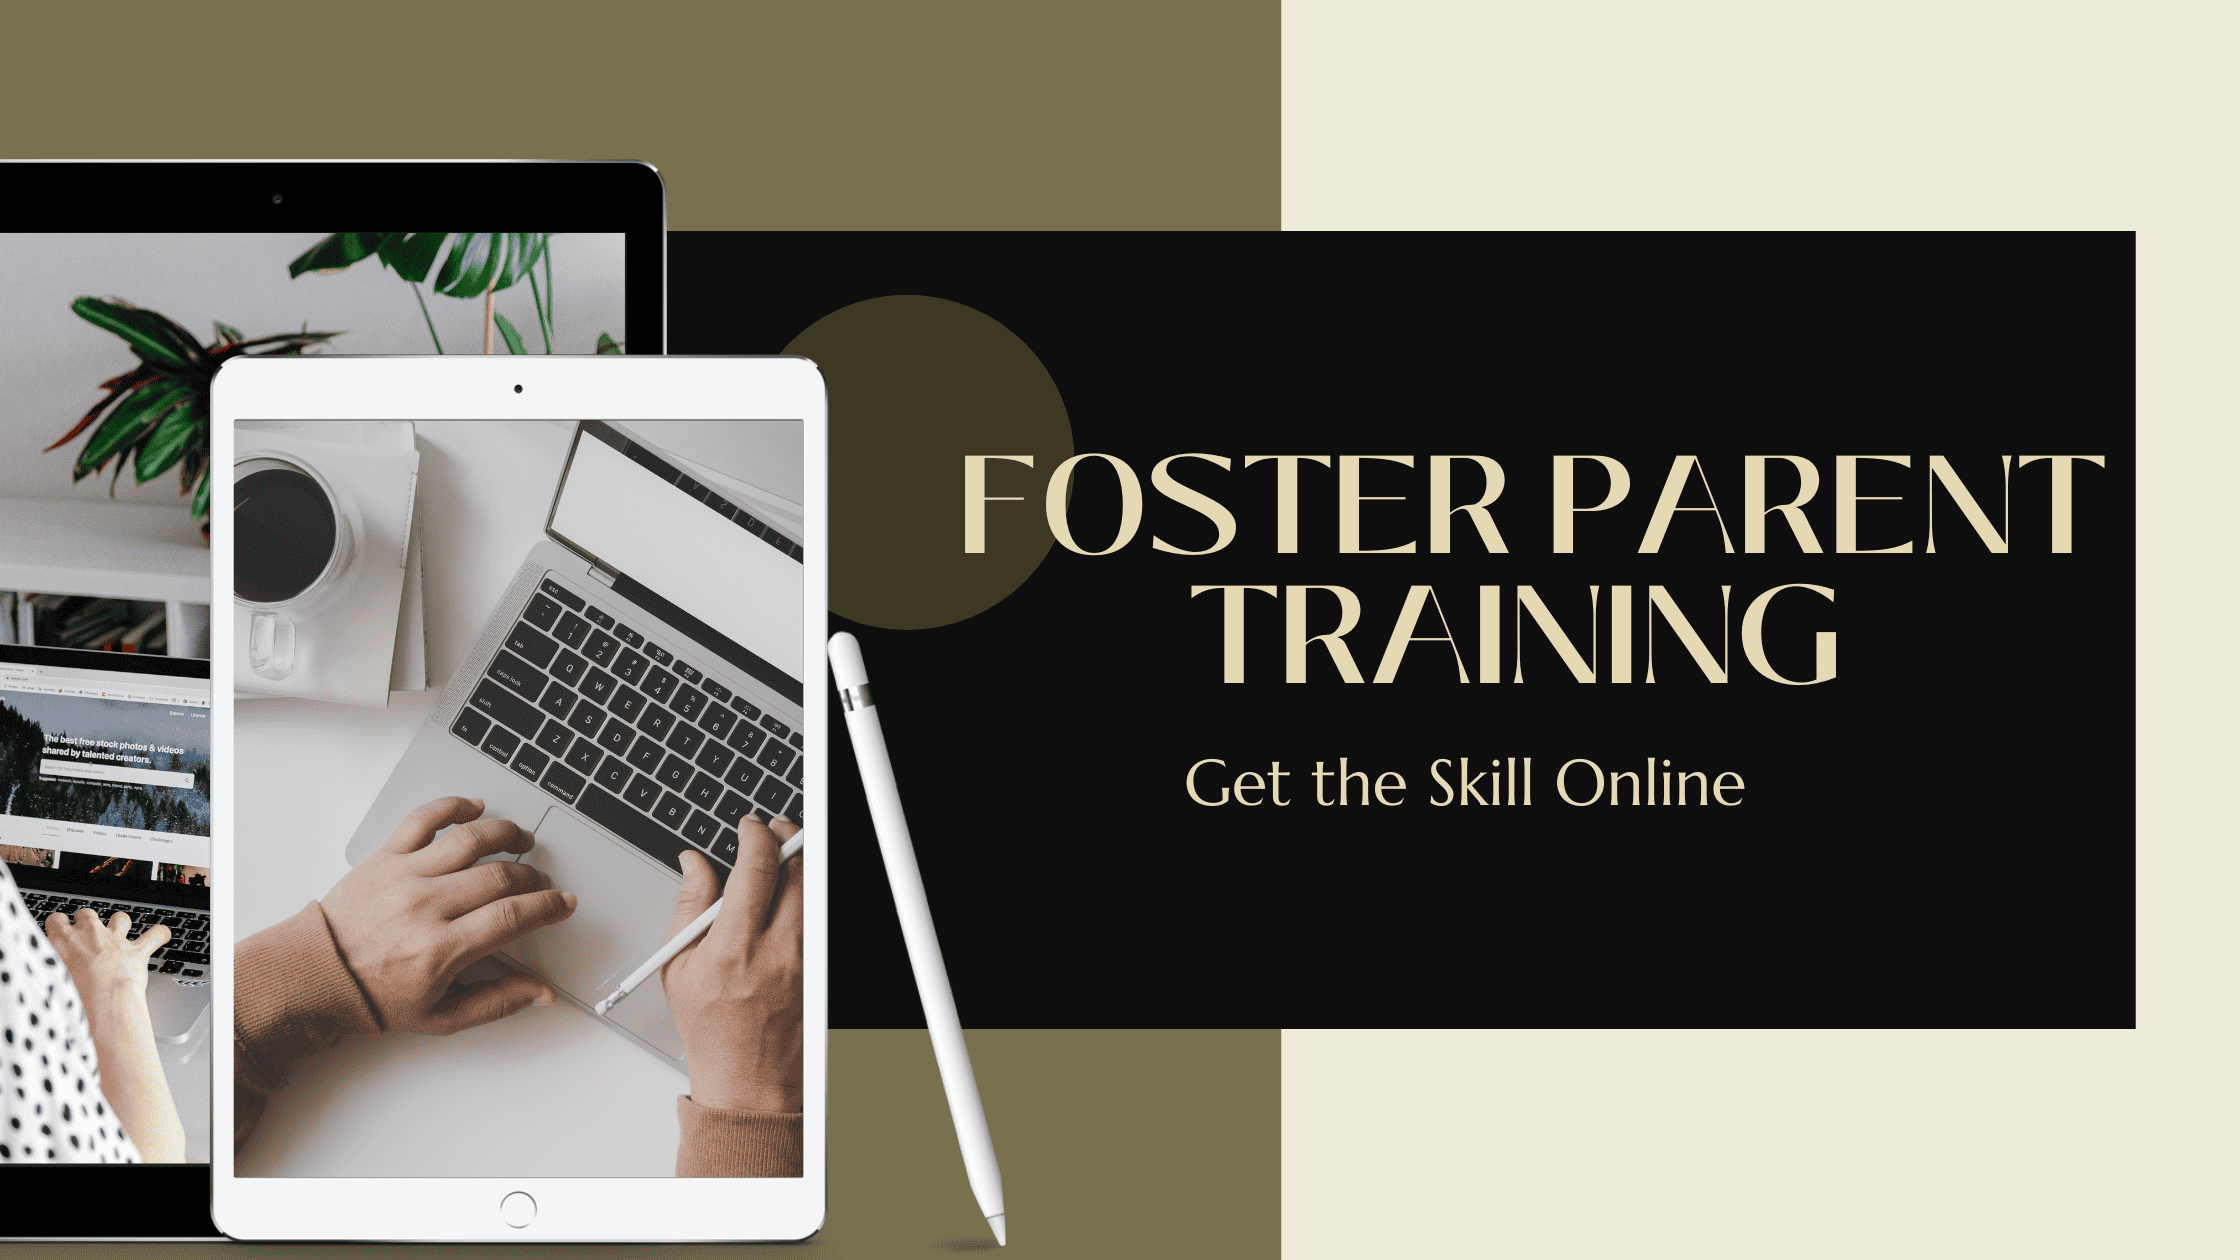 Free Online Foster Parent Training With Certificate